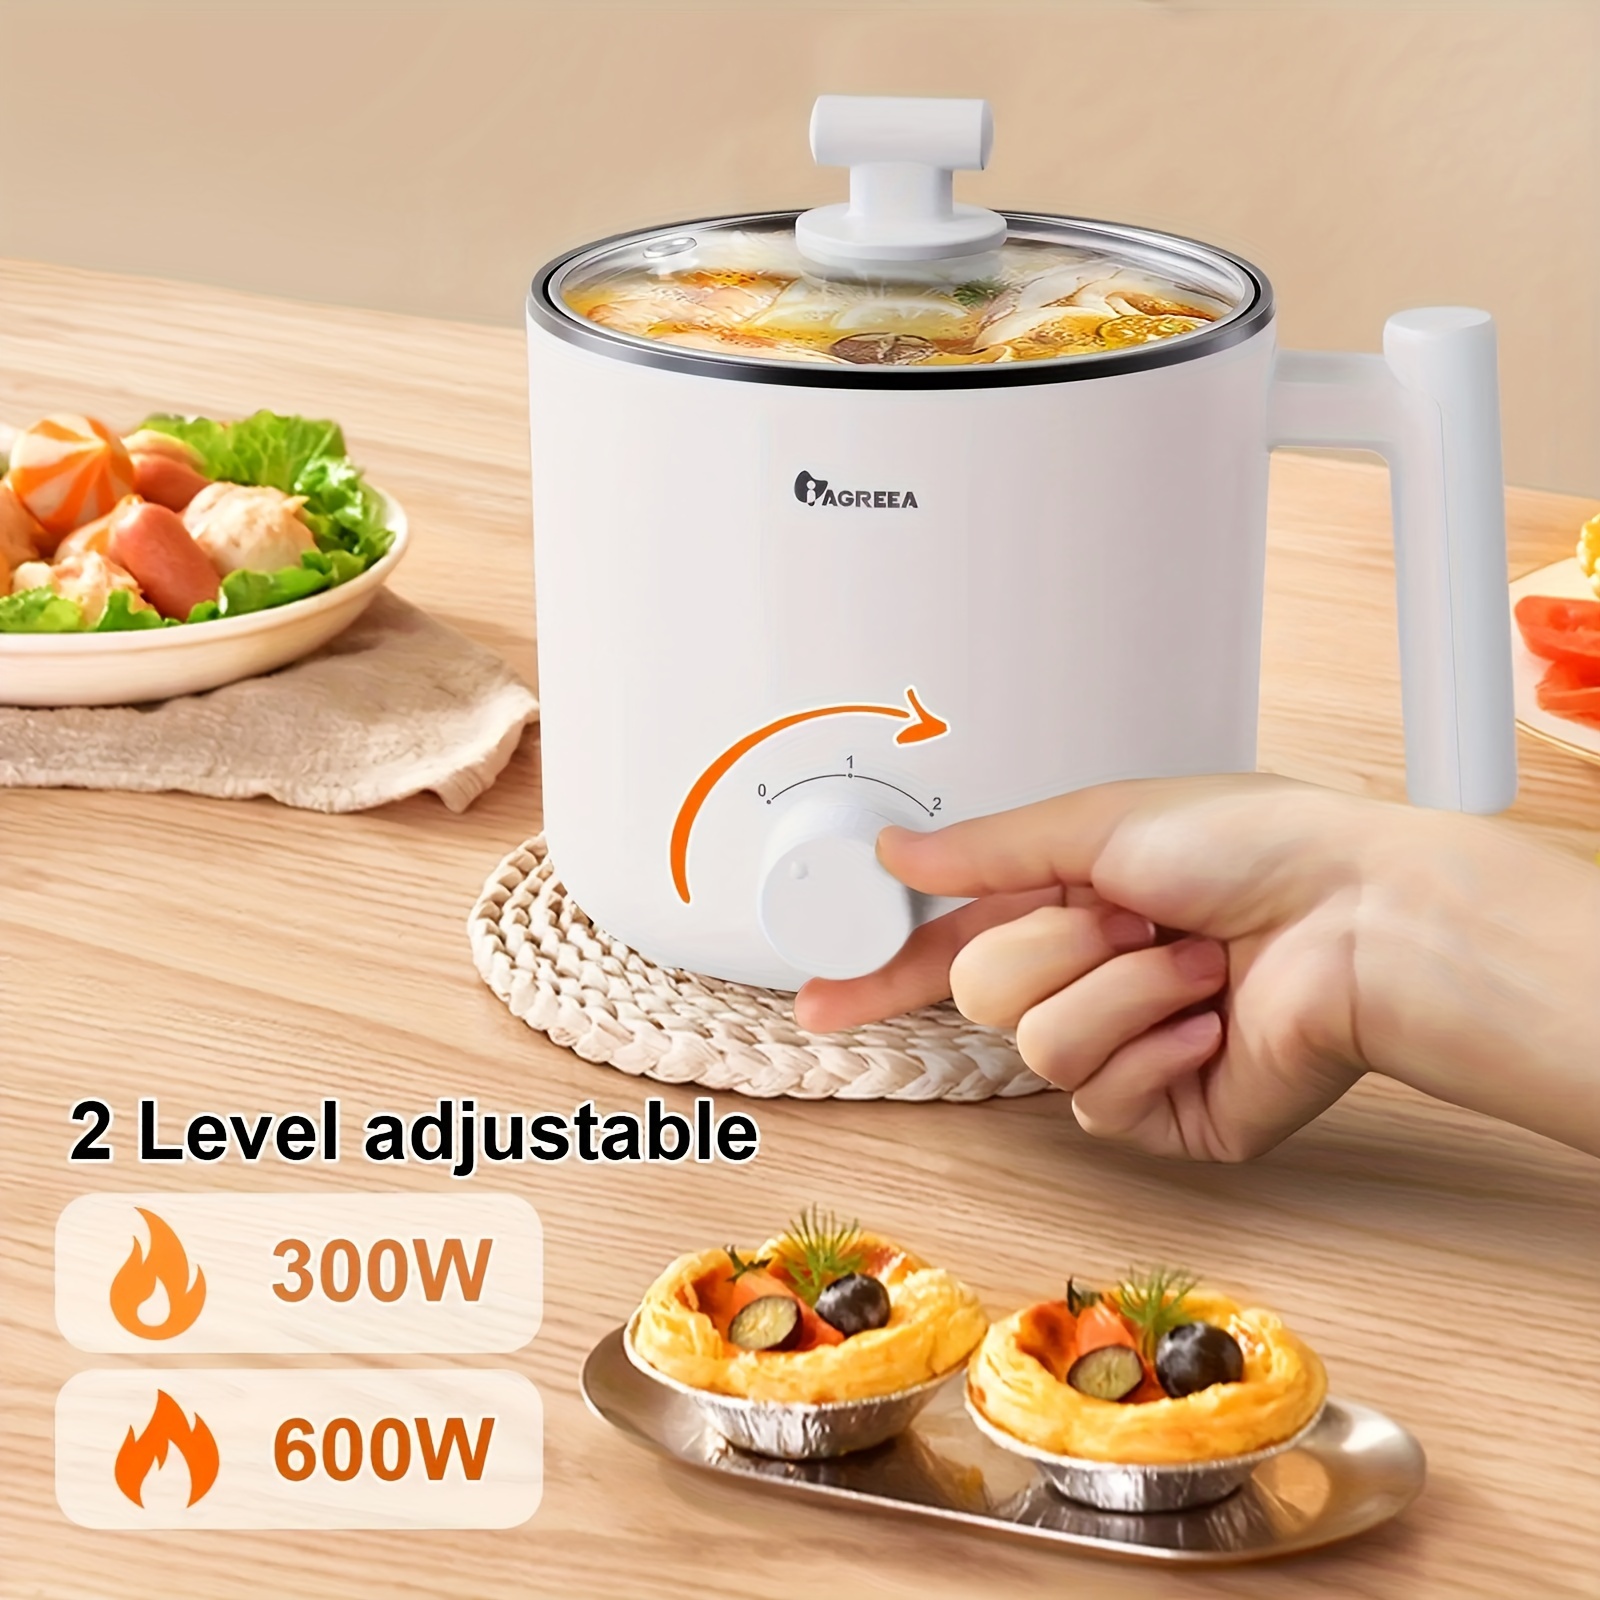 Dropship Rice Cooker Small Rice Maker Steamer Pot Electric Steamer Digital  Electric Rice Pot Multi Cooker & Food Steamer Warmer 5.3 Qt 5 Core RC0501  to Sell Online at a Lower Price